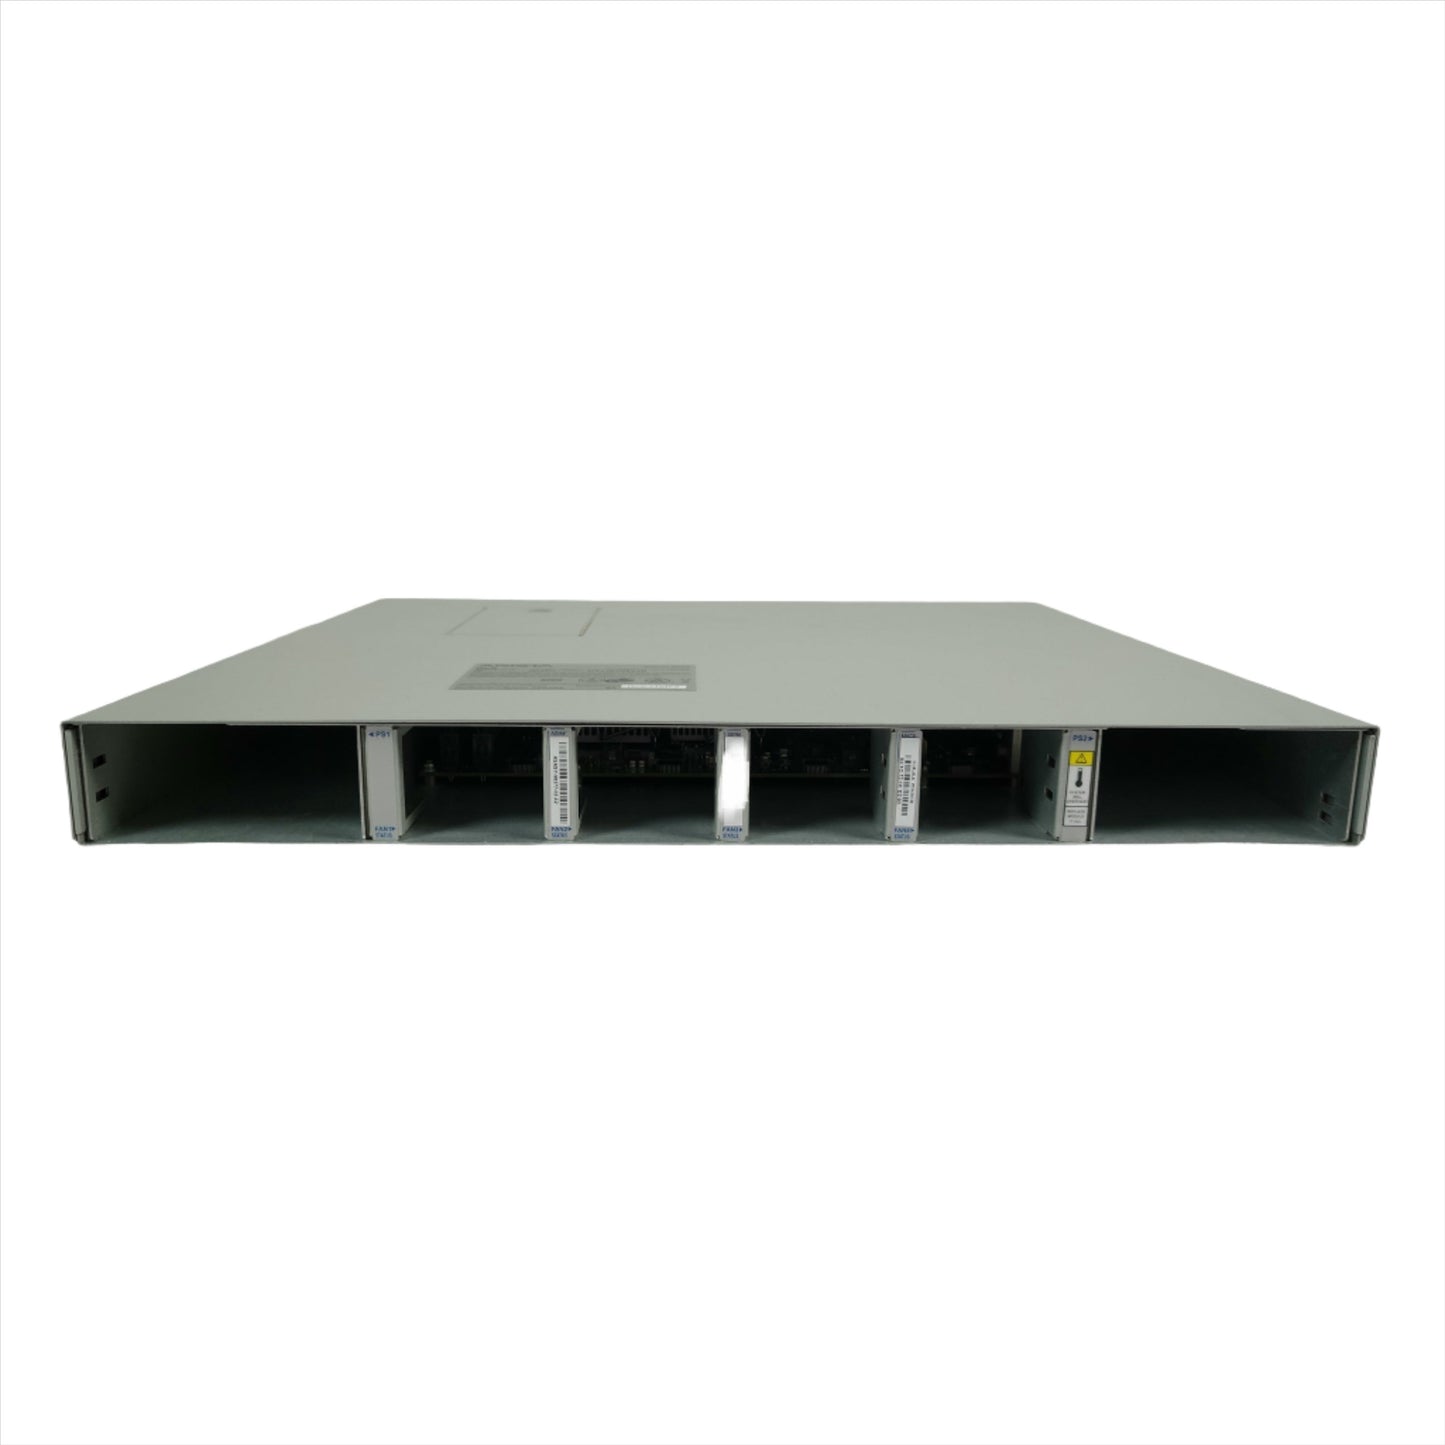 Arista DCS-7124FX 24-port 10GbE switch (SFP+), chassis only (Used - Good)